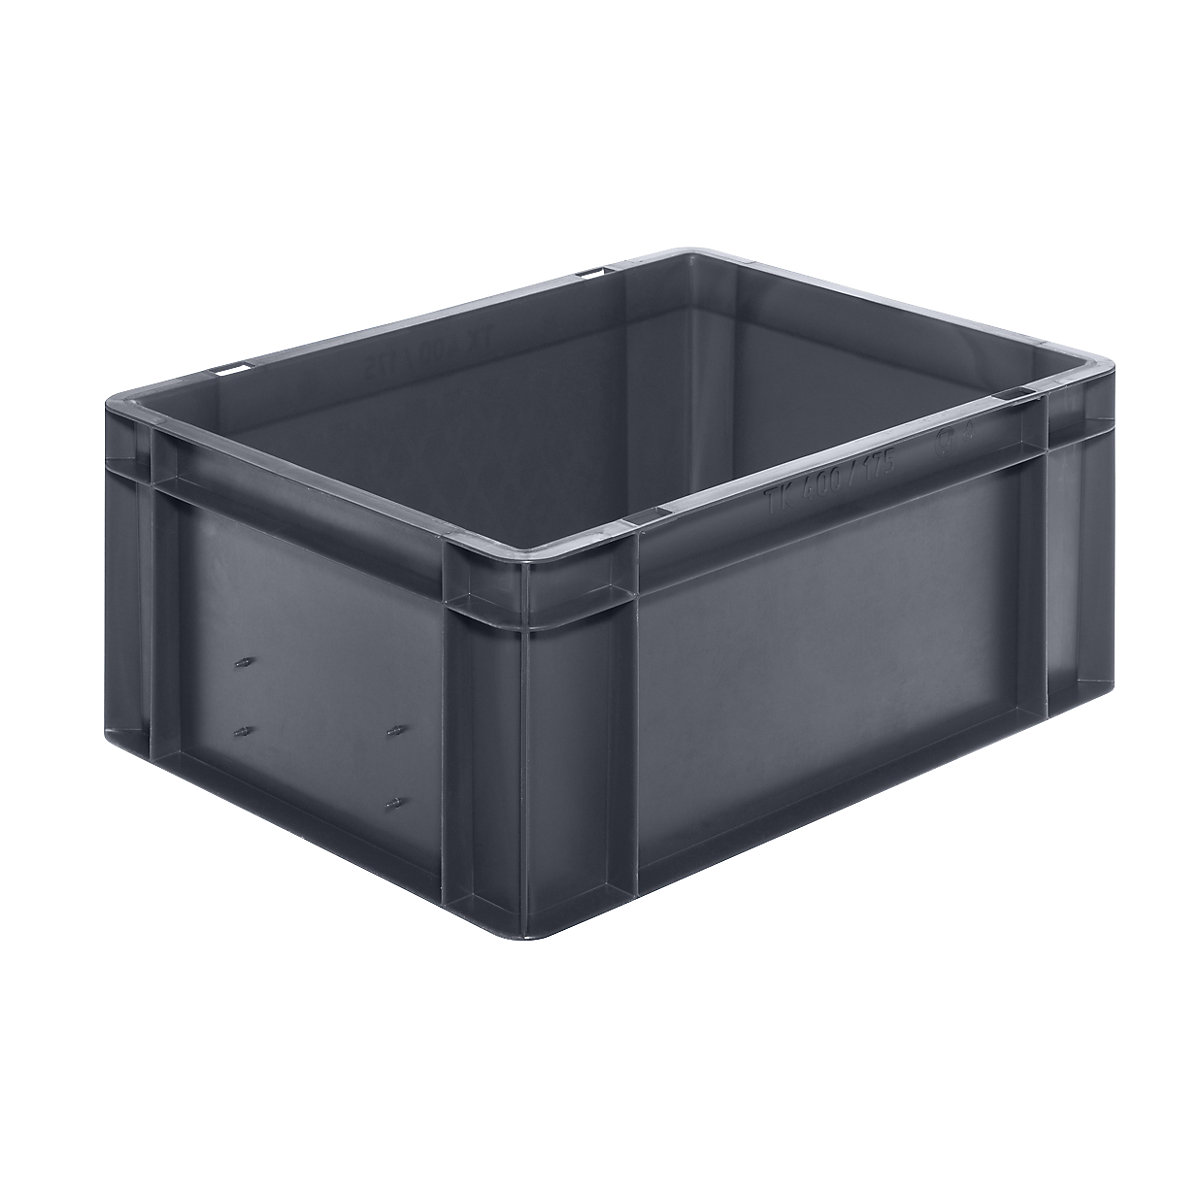 Euro stacking container, closed walls and base, LxWxH 400 x 300 x 175 mm, grey, pack of 5